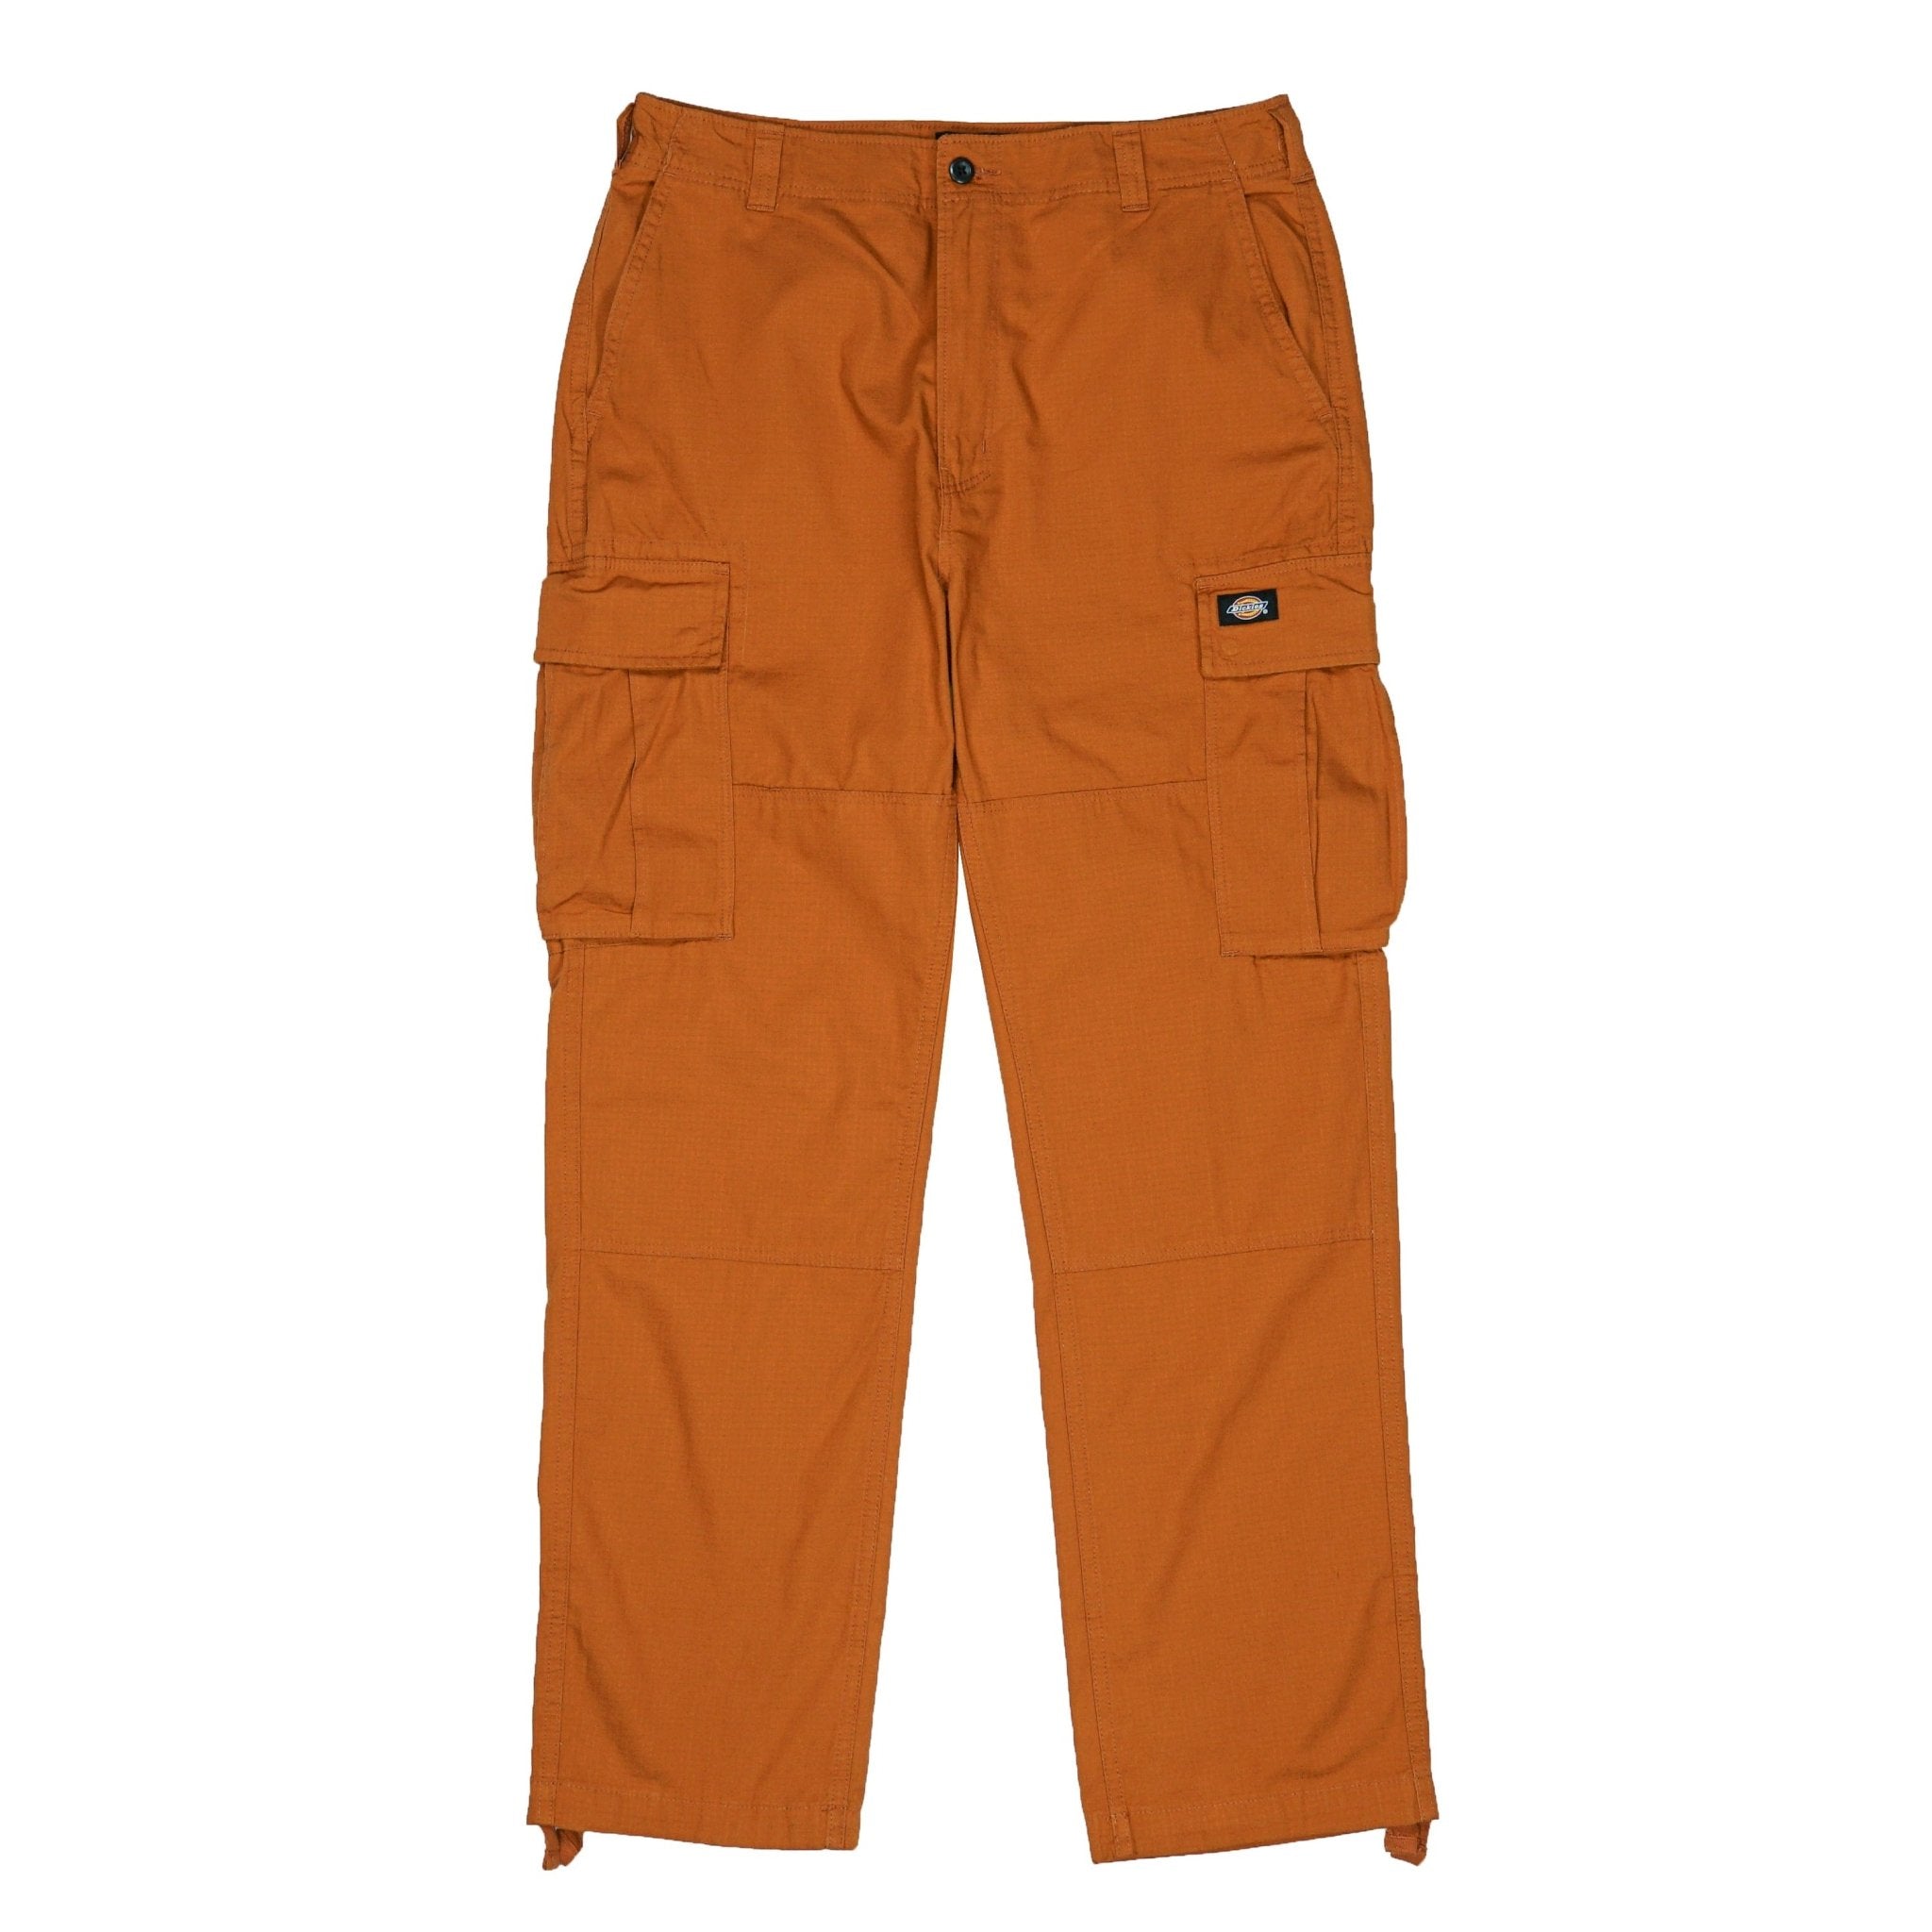 Ripstop Cargo Pants in marmalade